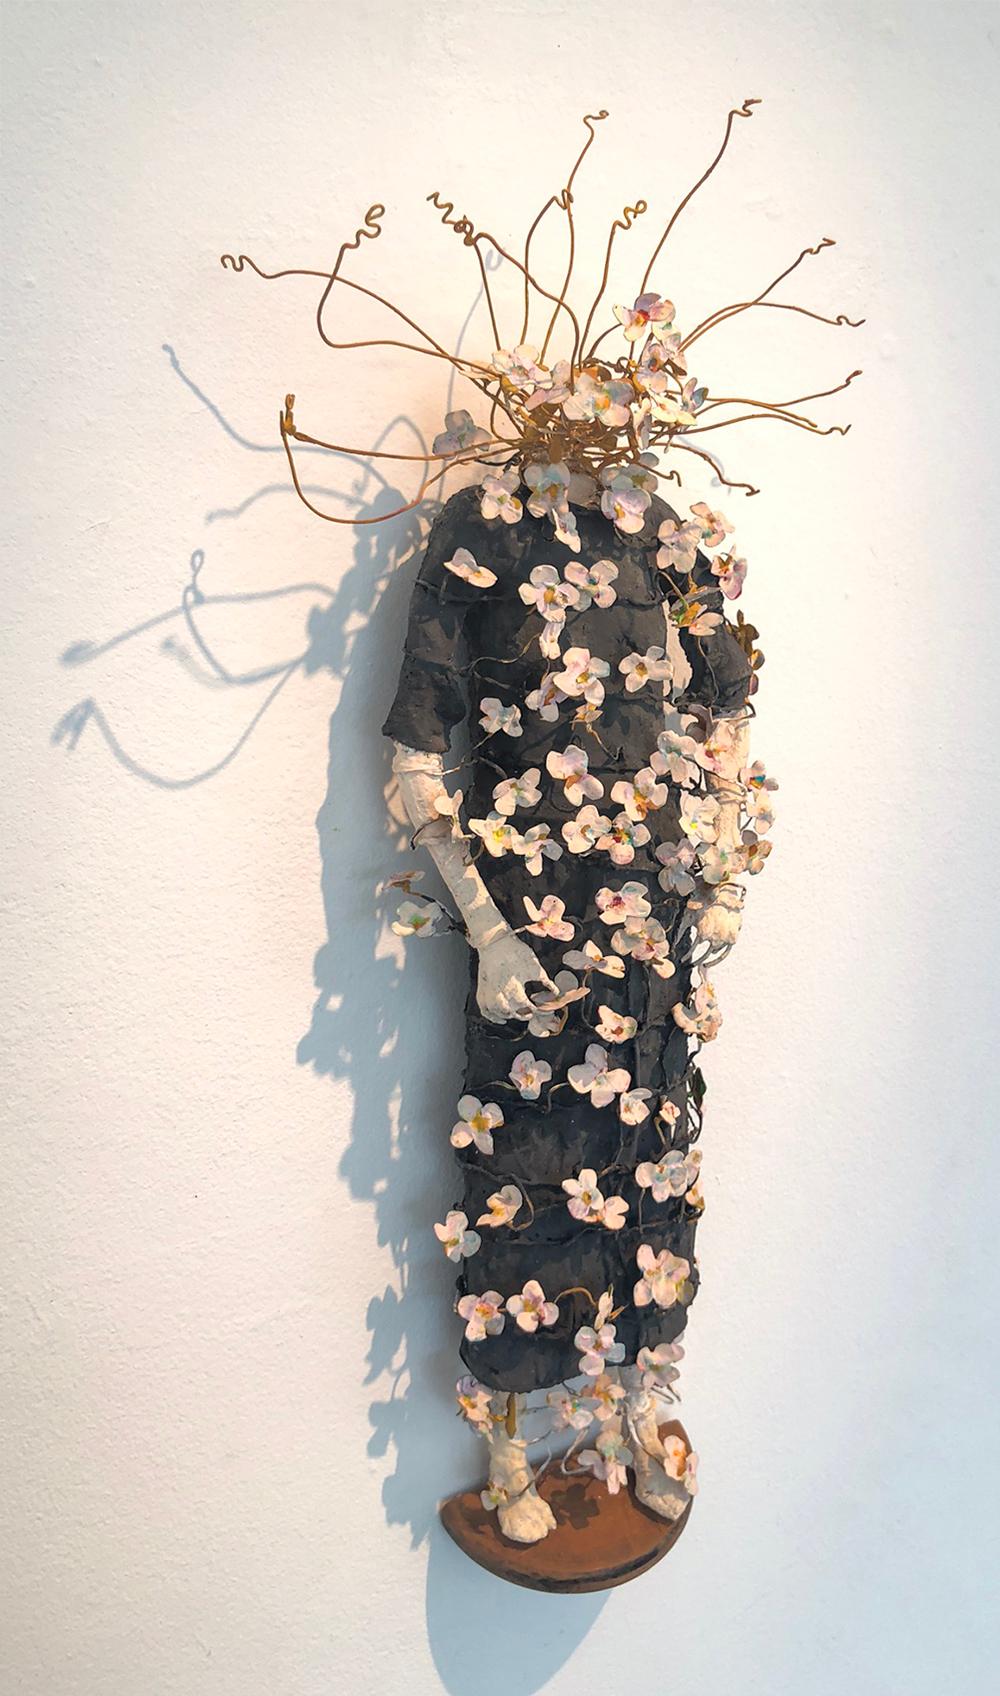 Dressed in Wildflowers and Furrow Weeds - Gray Figurative Sculpture by Johan Hagaman